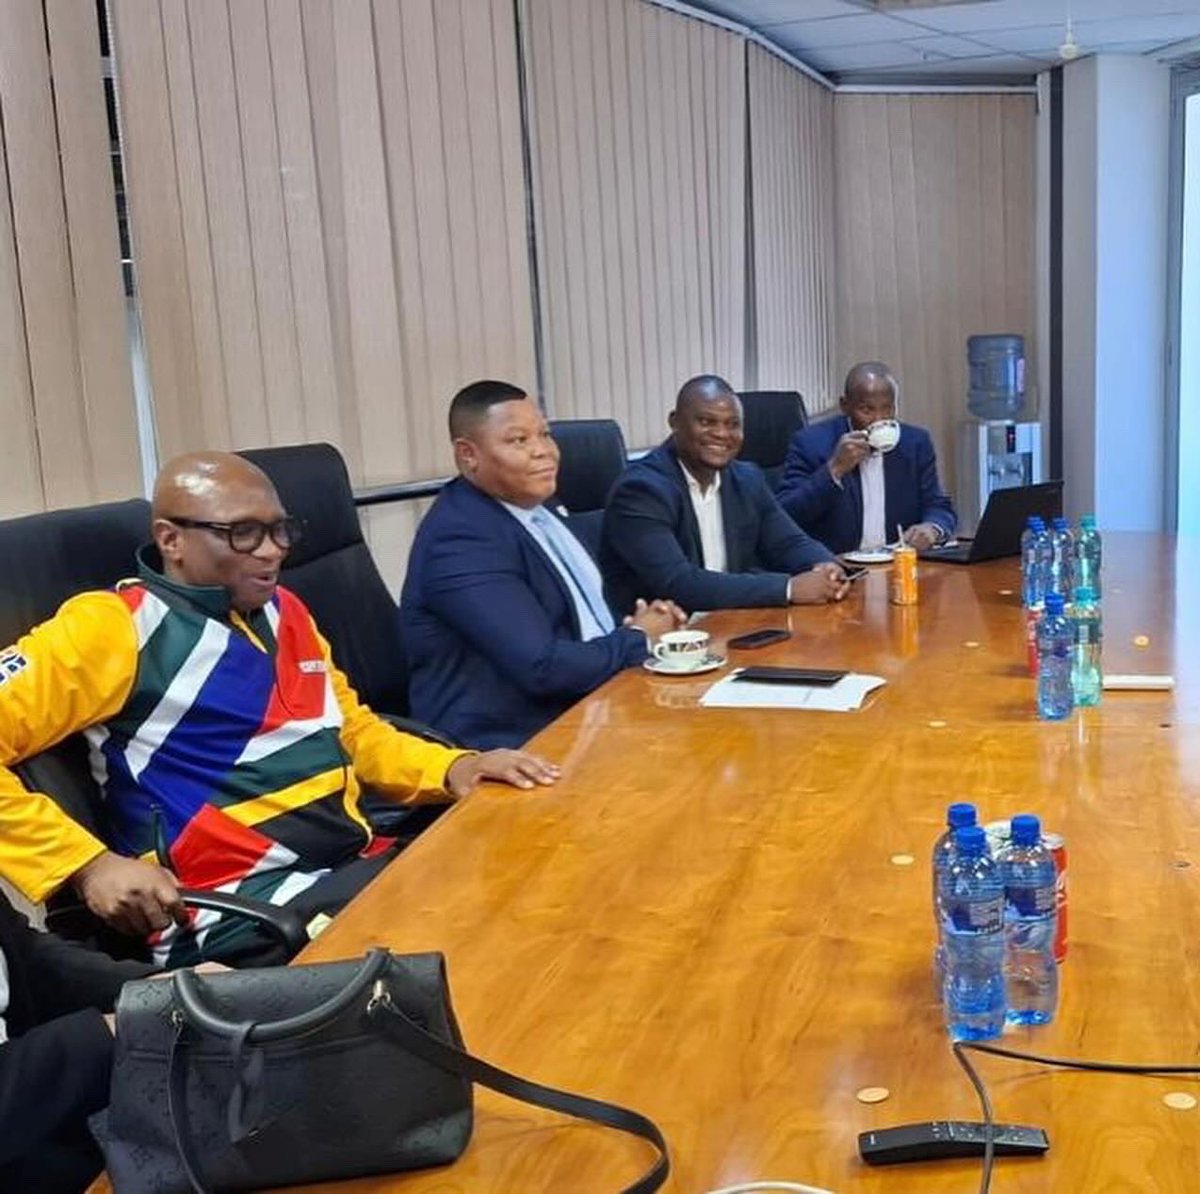 Today, Minister Zizi Kodwa met with Algeria’s Ambassador to South Africa HE Mr Saad Maandi. This bilateral meeting discussed opportunities to strengthen ties between South Africa and Algeria through sport #Olympics #InspiringANationOfWinners